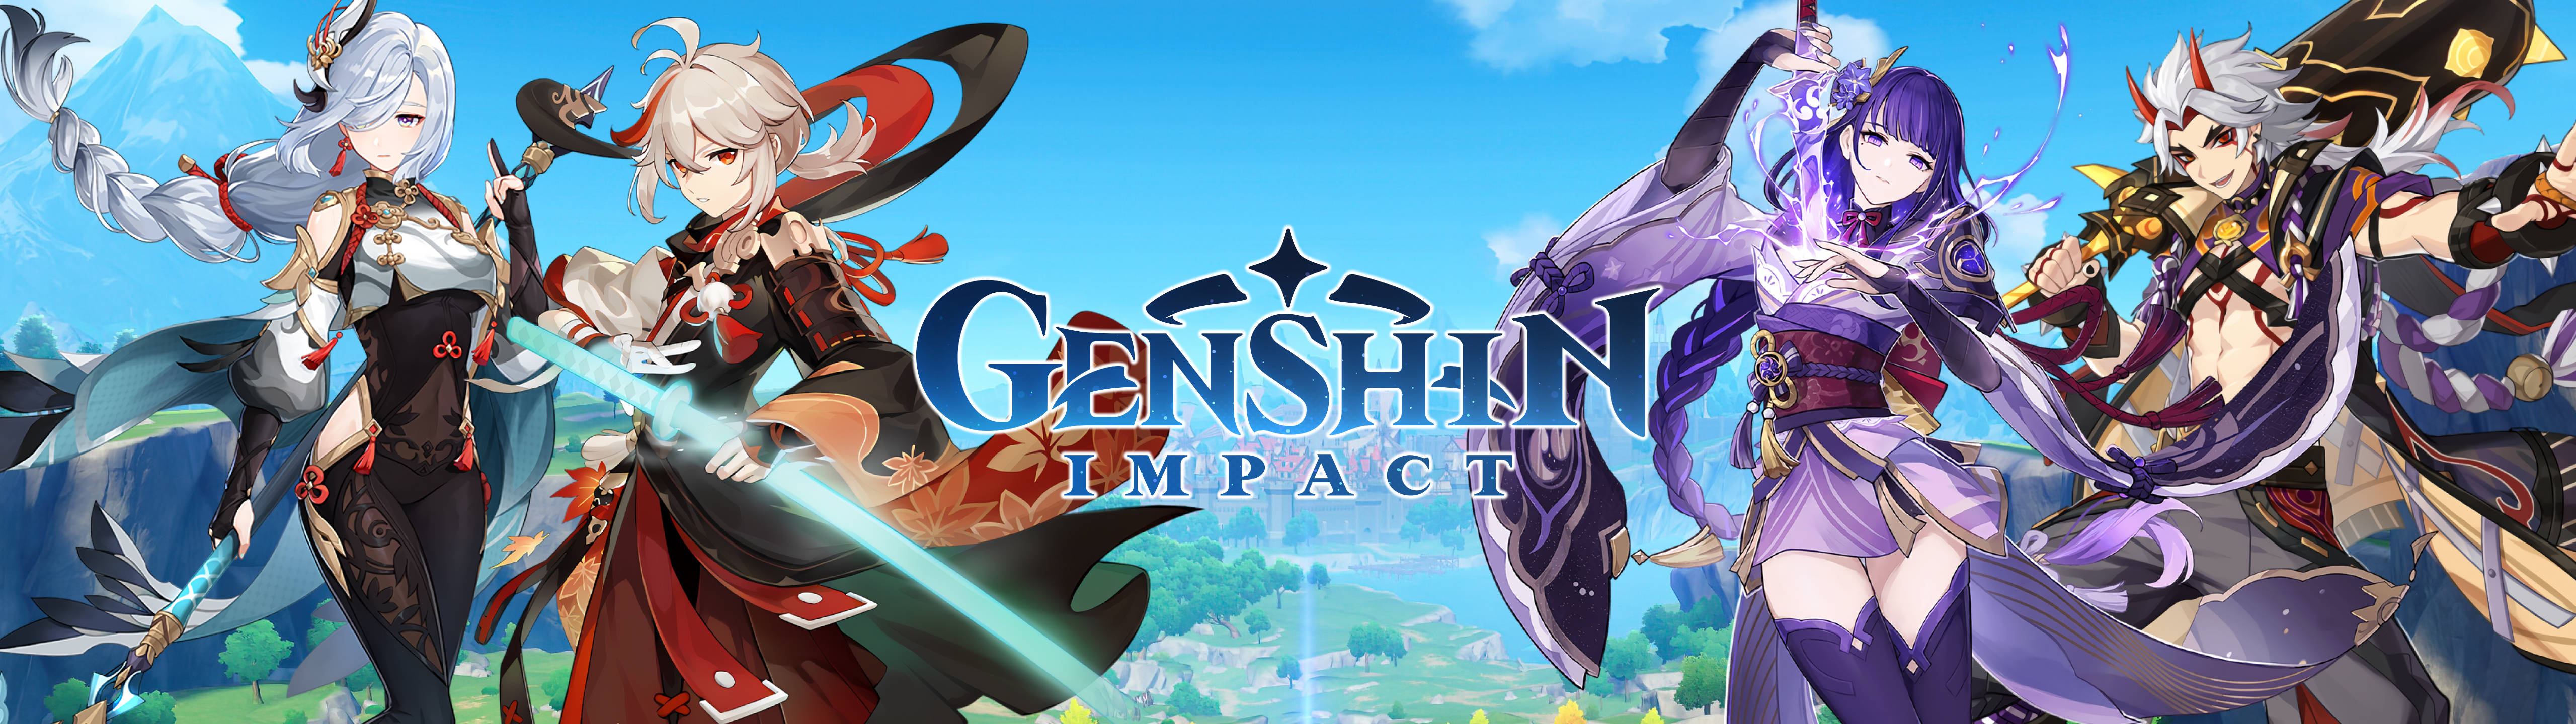 Genshin Impact New Characters 5120x1440 Gaming Background